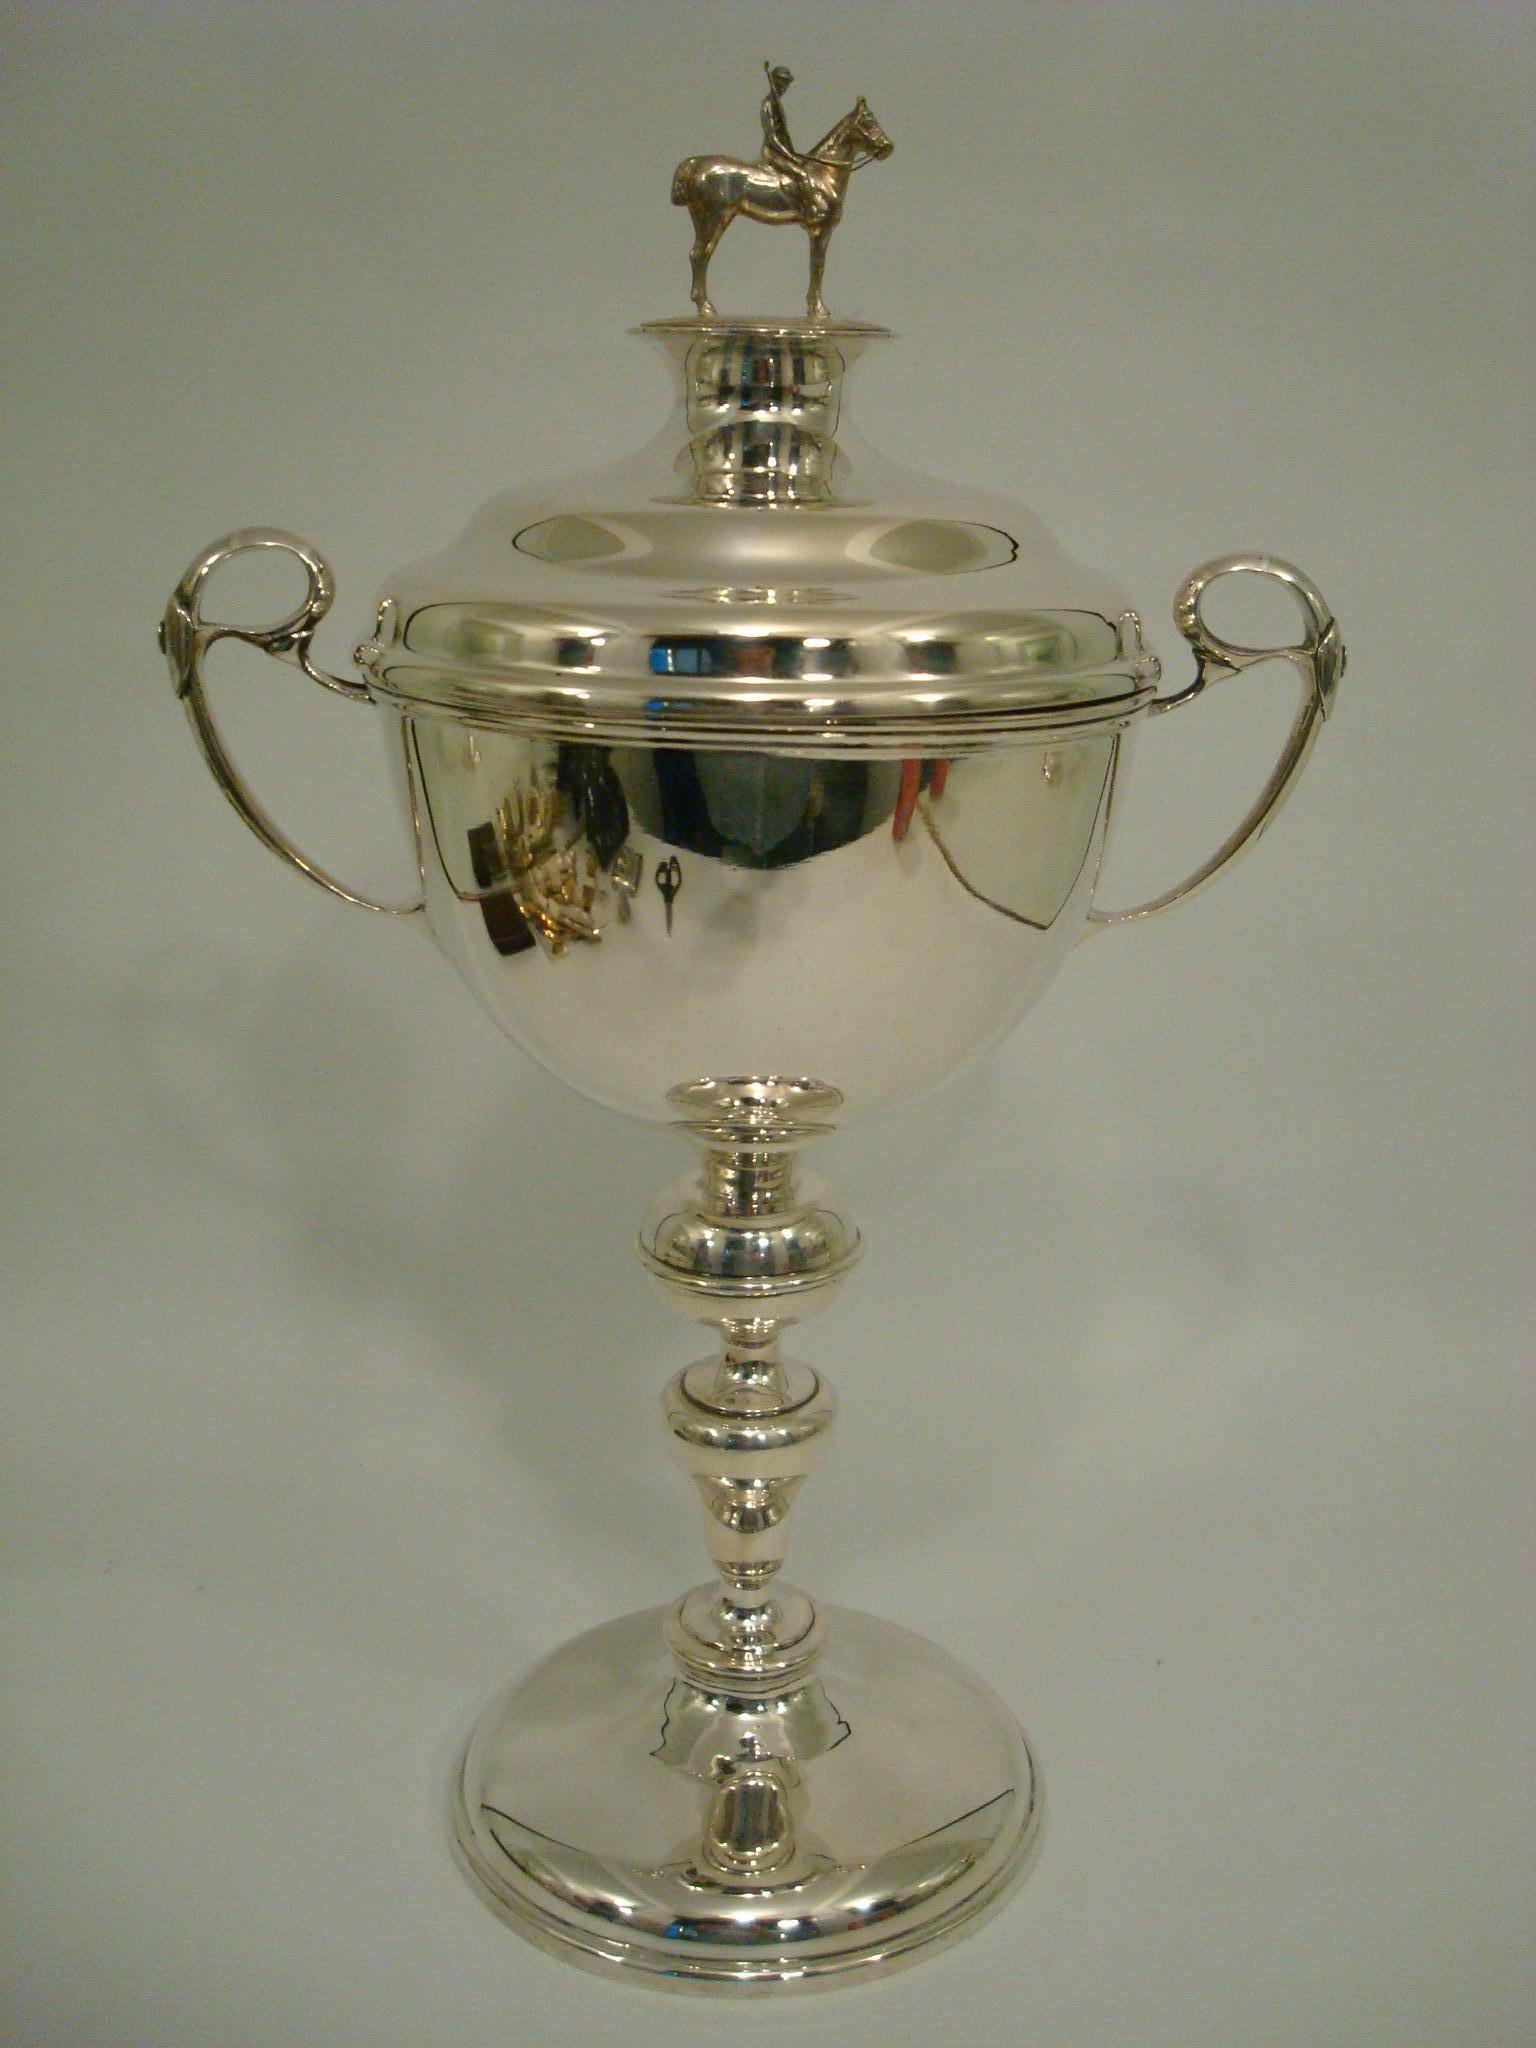 Polo Player Trophy Sterling Silver. On the Lid it has a sculpture of a player over his horse. Fantastic Trophy.
English Sterling Silver Marks. Birmingham 1928
Alexander Clark & Co Limited,
Business established in 1891 in London by Clift Alexander